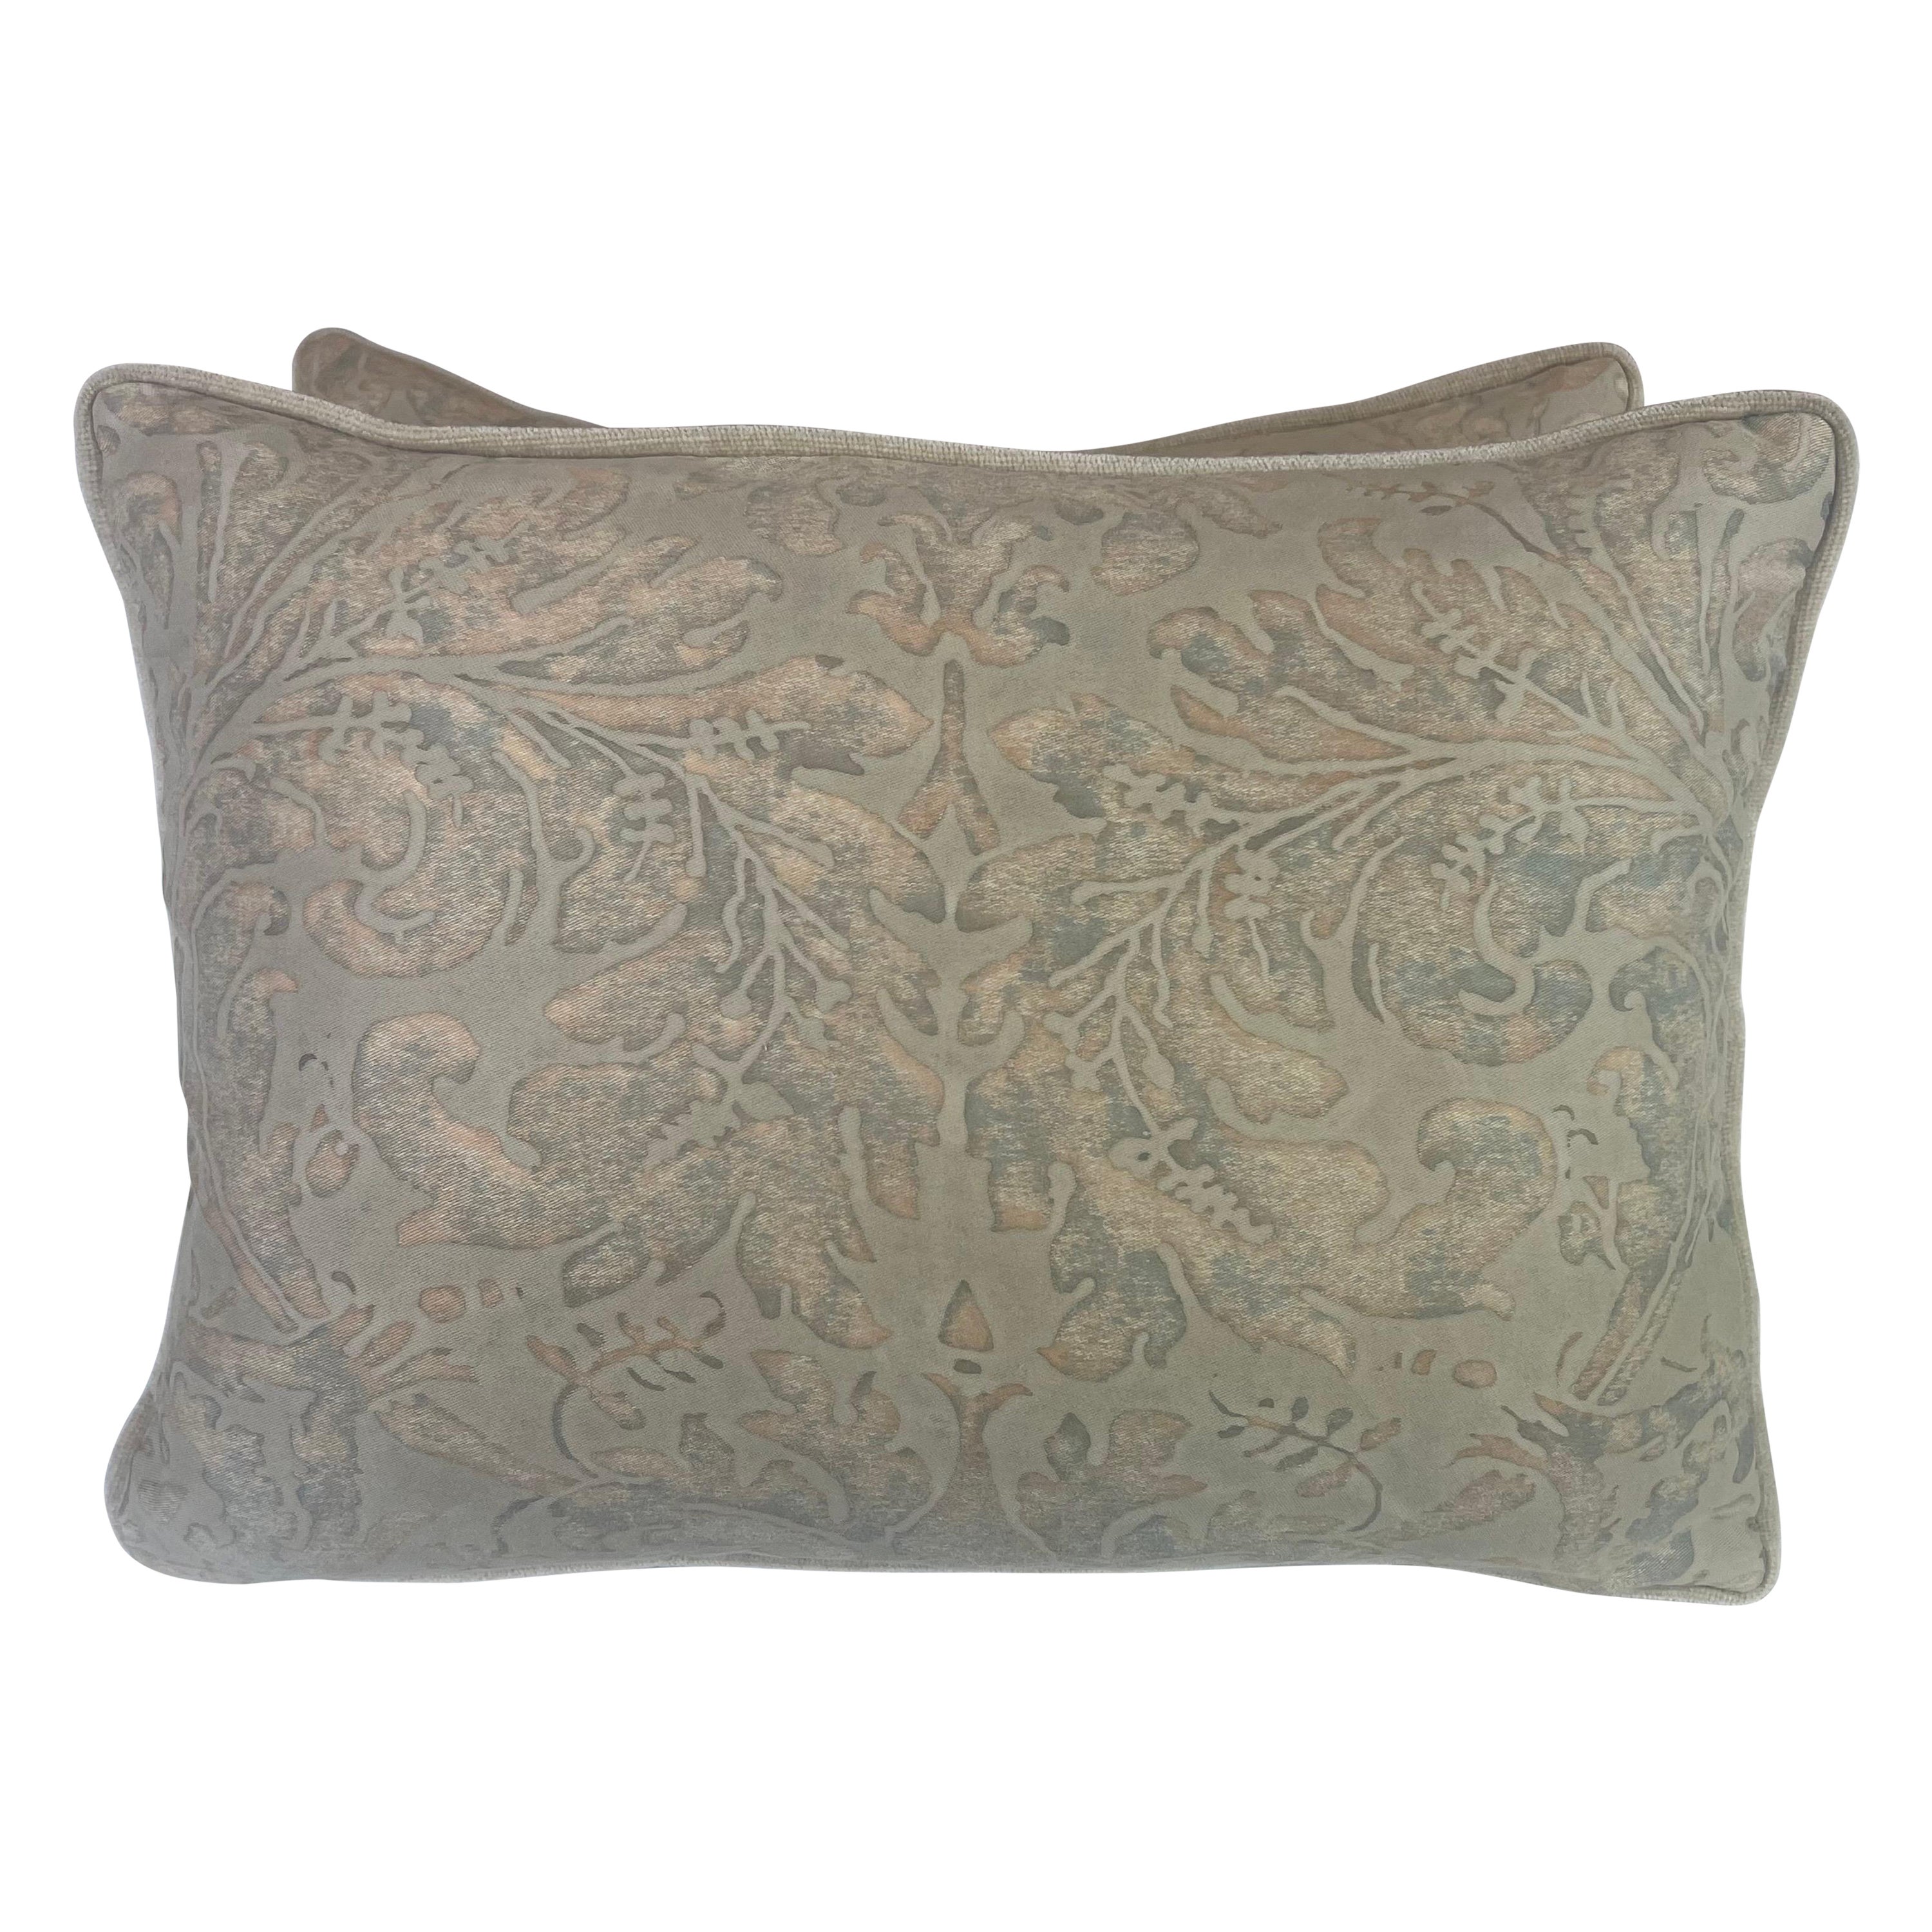 Pair of Lucrenzia Patterned Fortuny Pillows